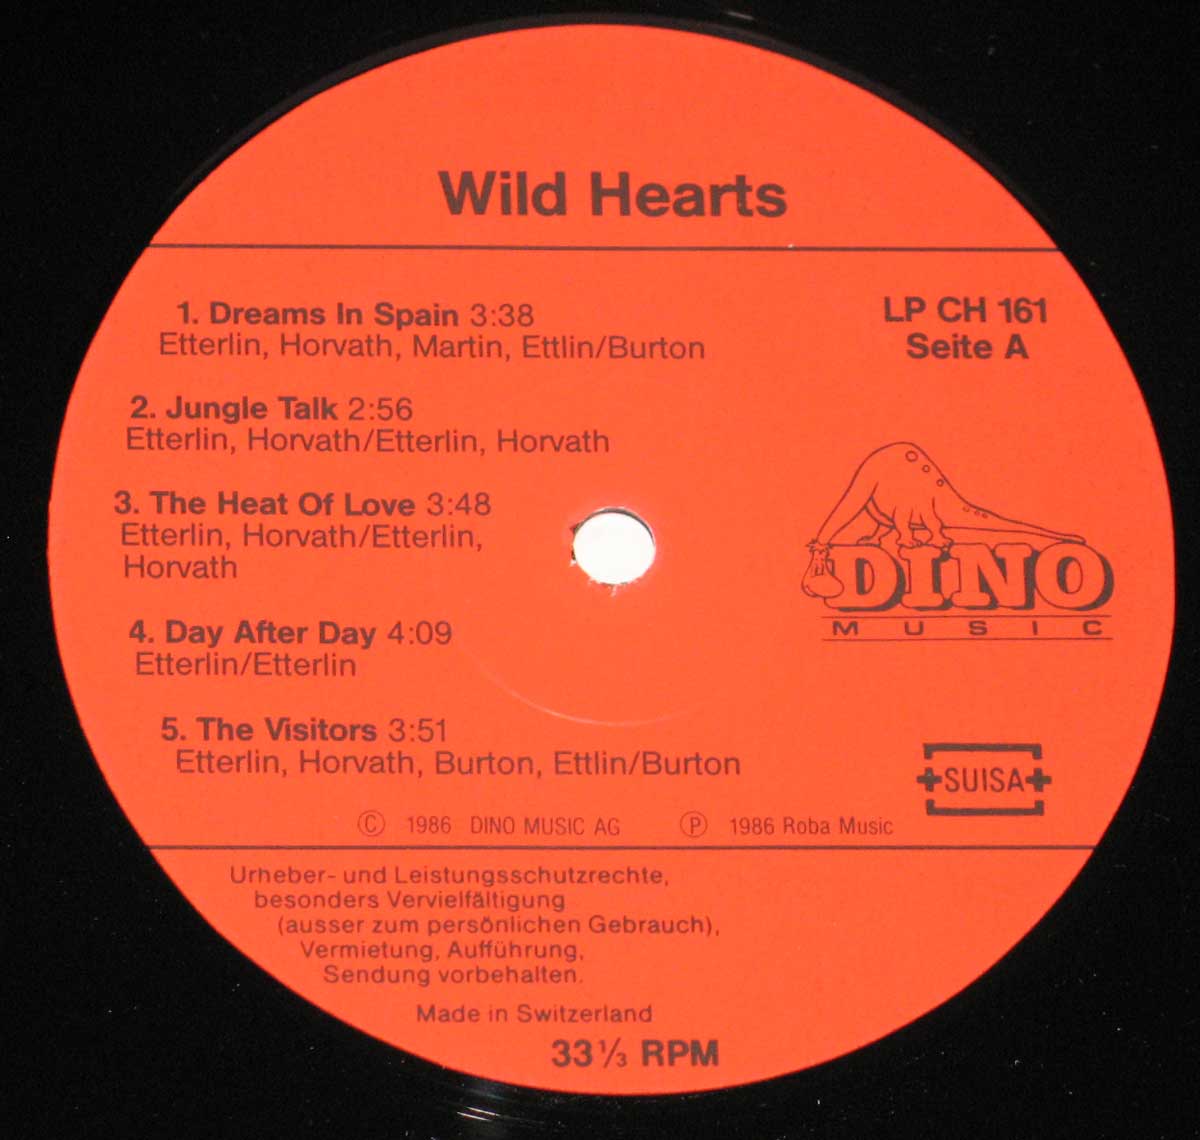 Close-up Photo of "Wild Hearts" Red "Dino Music" LP CH 161 Record Label  